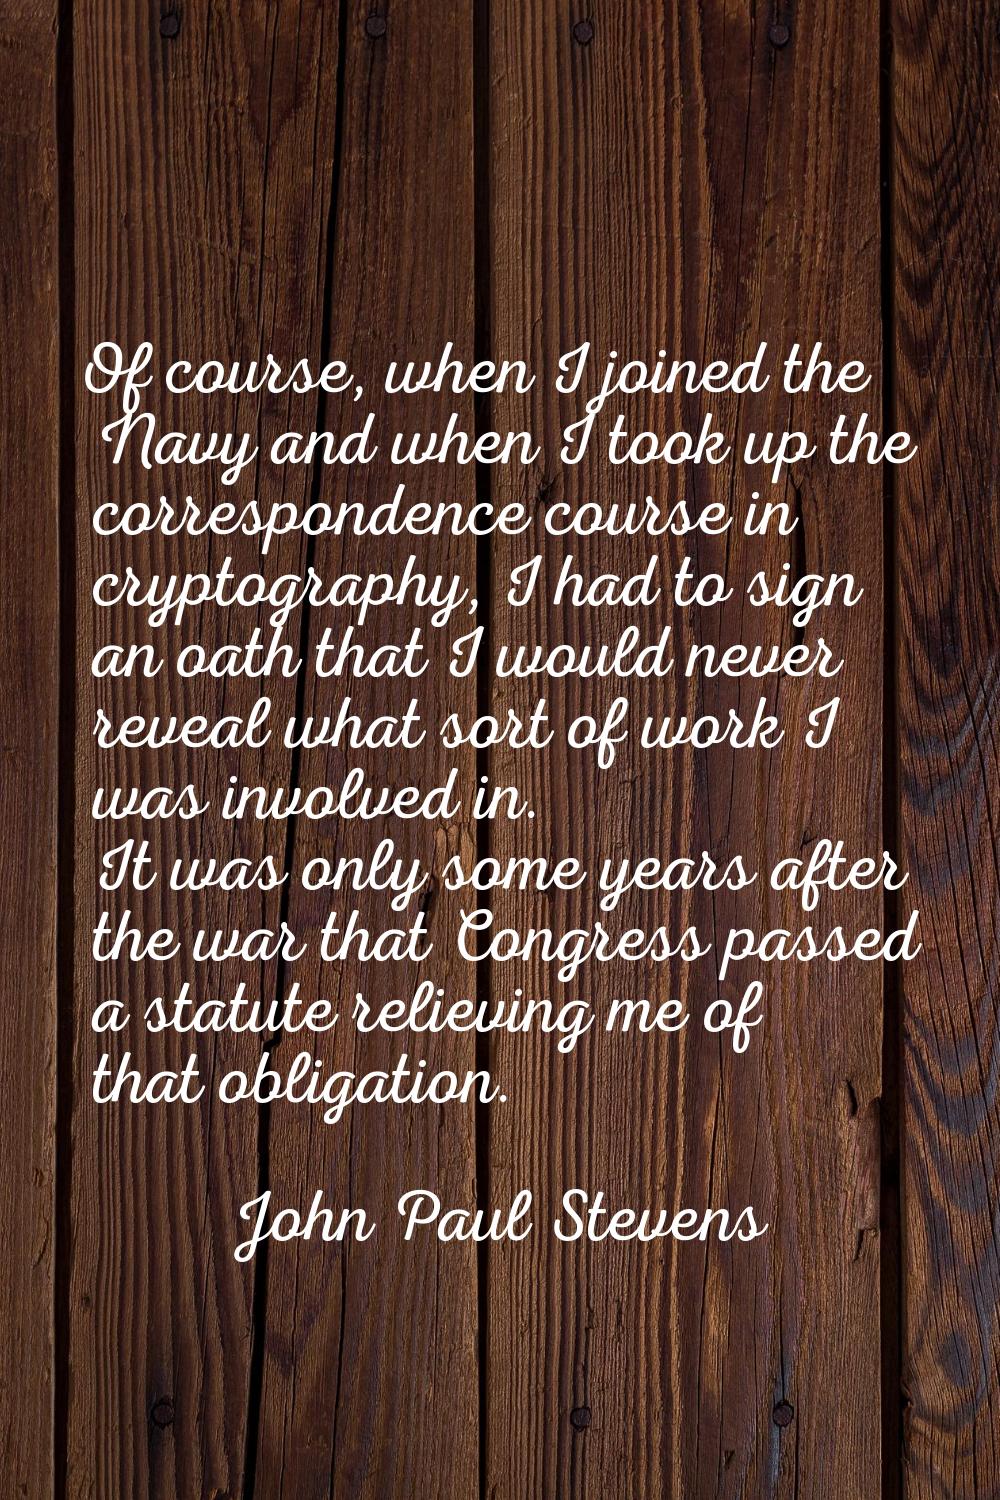 Of course, when I joined the Navy and when I took up the correspondence course in cryptography, I h